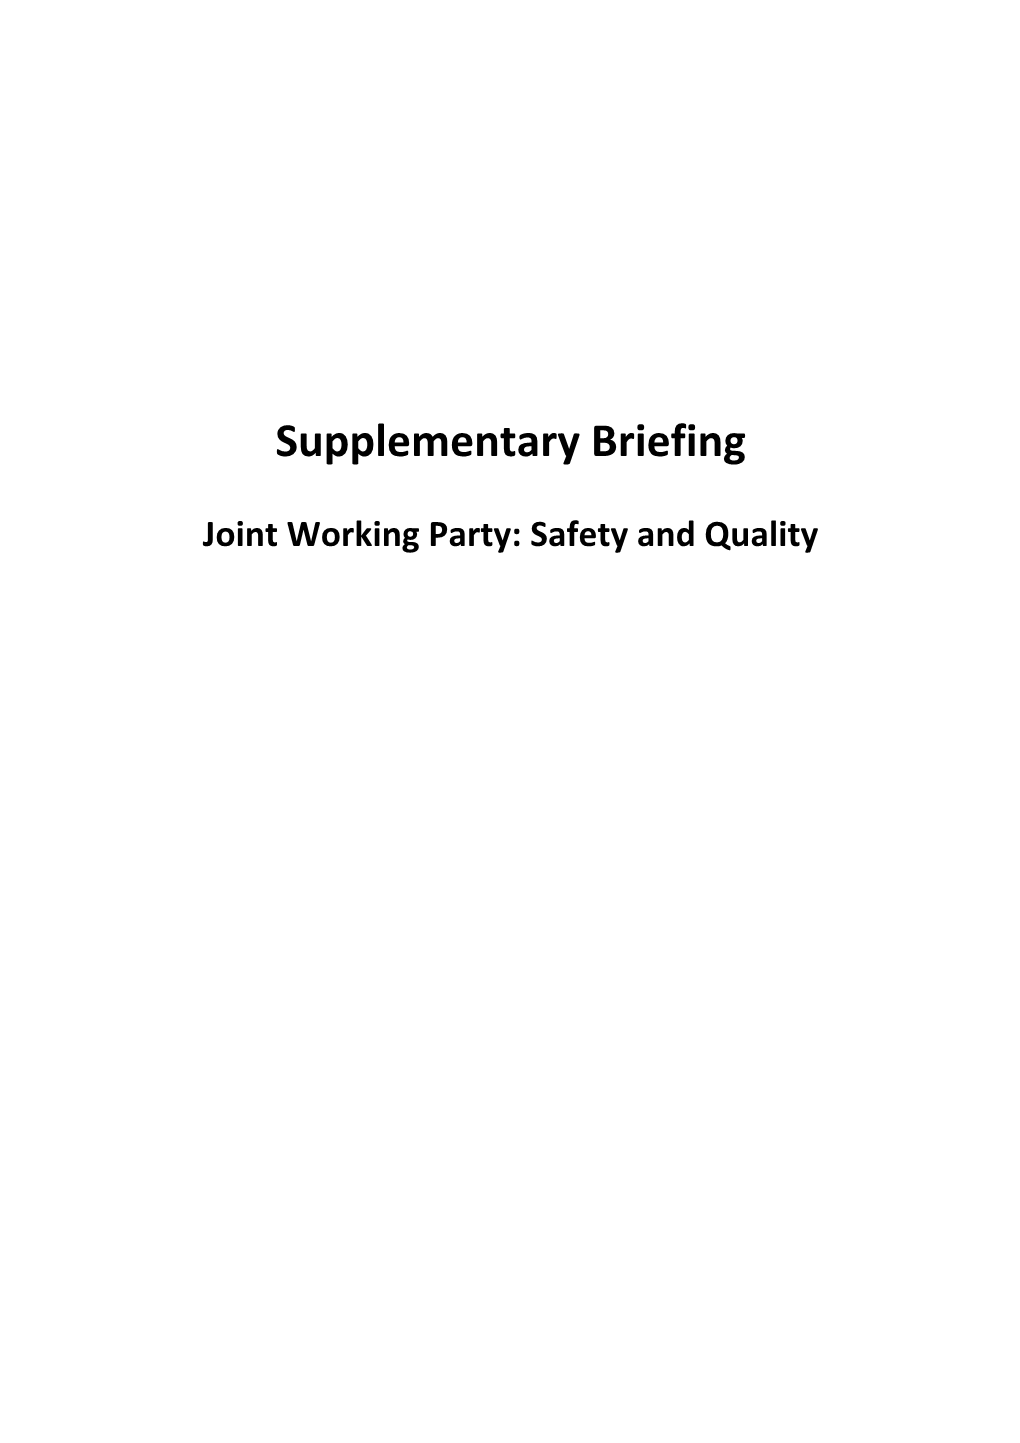 Joint Working Party: Safety and Quality